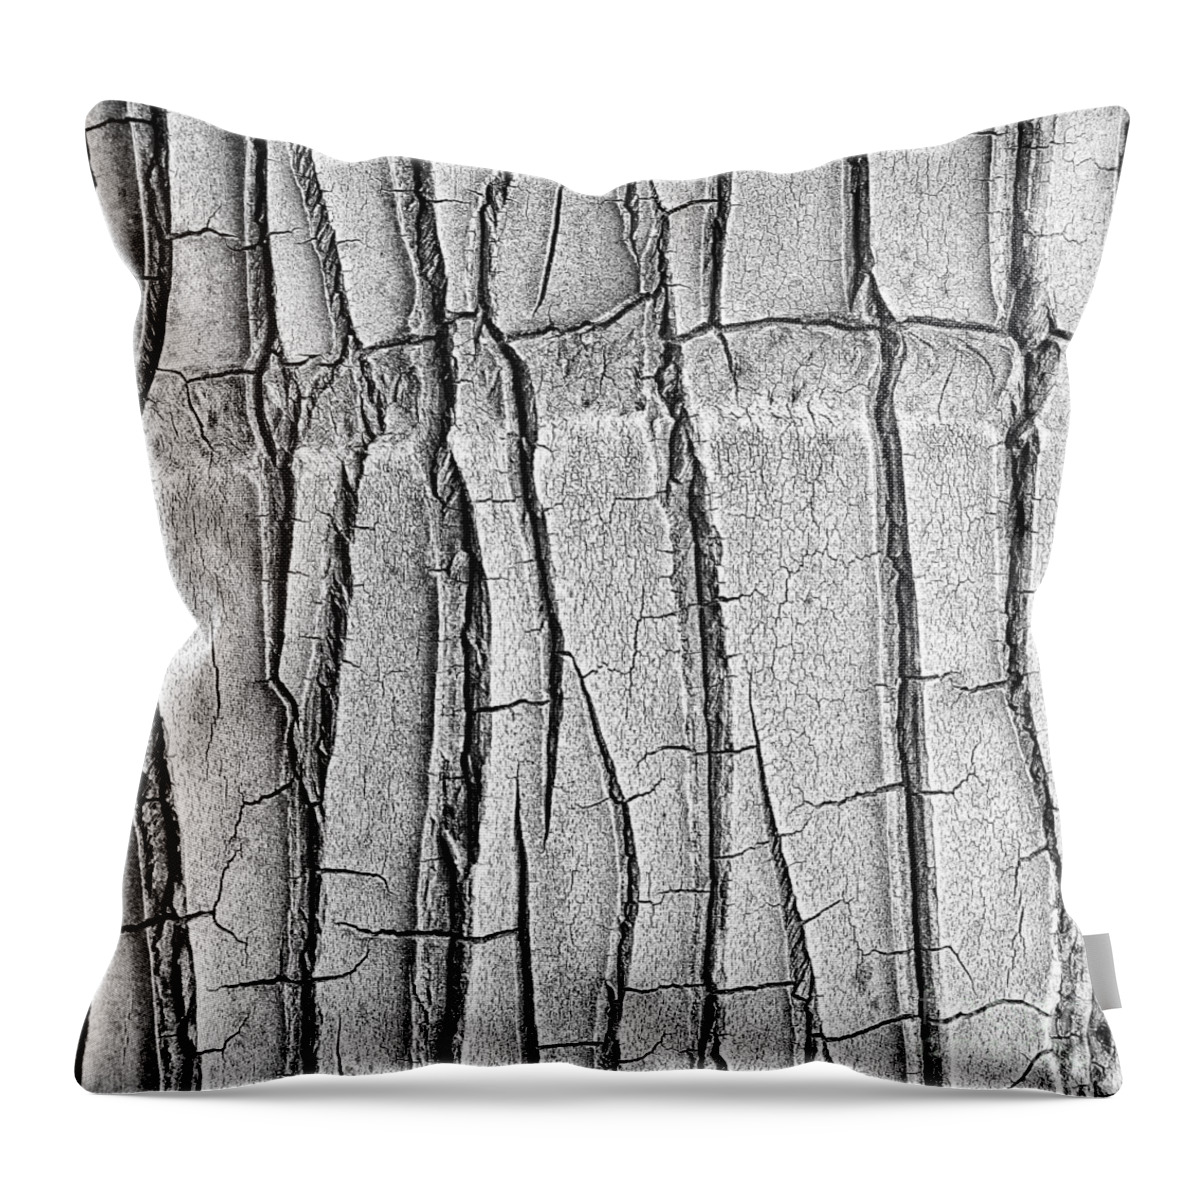 Abstract Throw Pillow featuring the photograph Cracked Trunk by Paul Topp